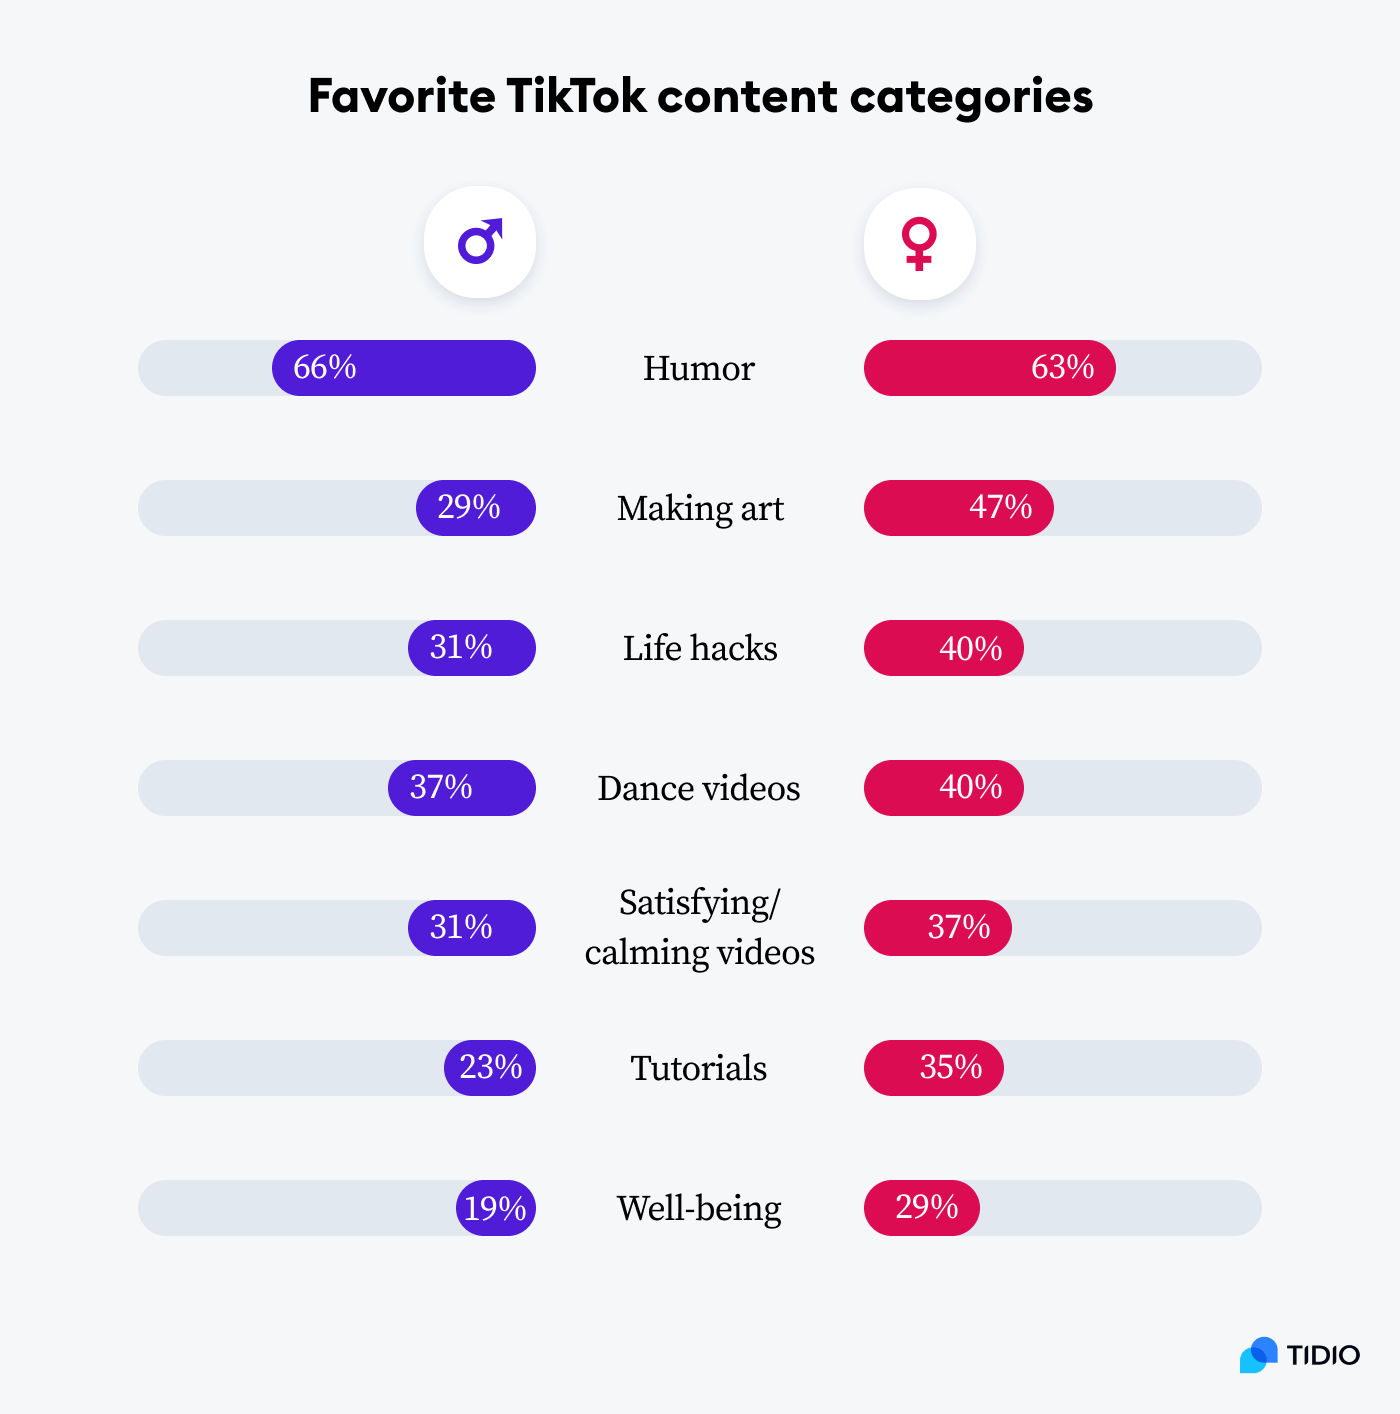 Tik Tok content categories favored by men and women